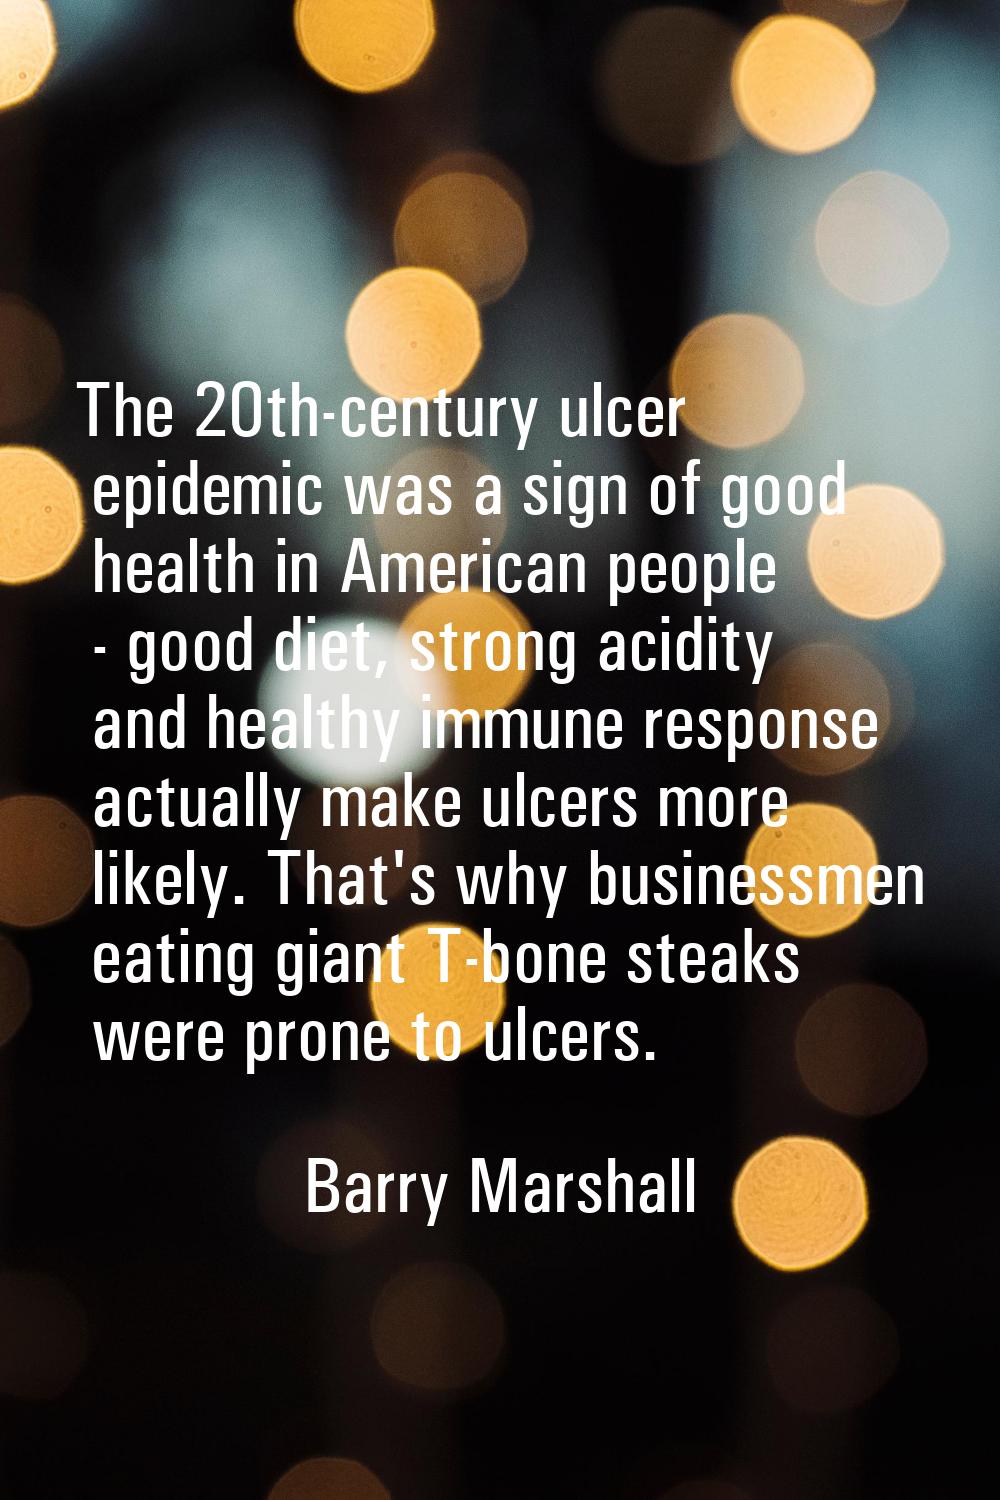 The 20th-century ulcer epidemic was a sign of good health in American people - good diet, strong ac